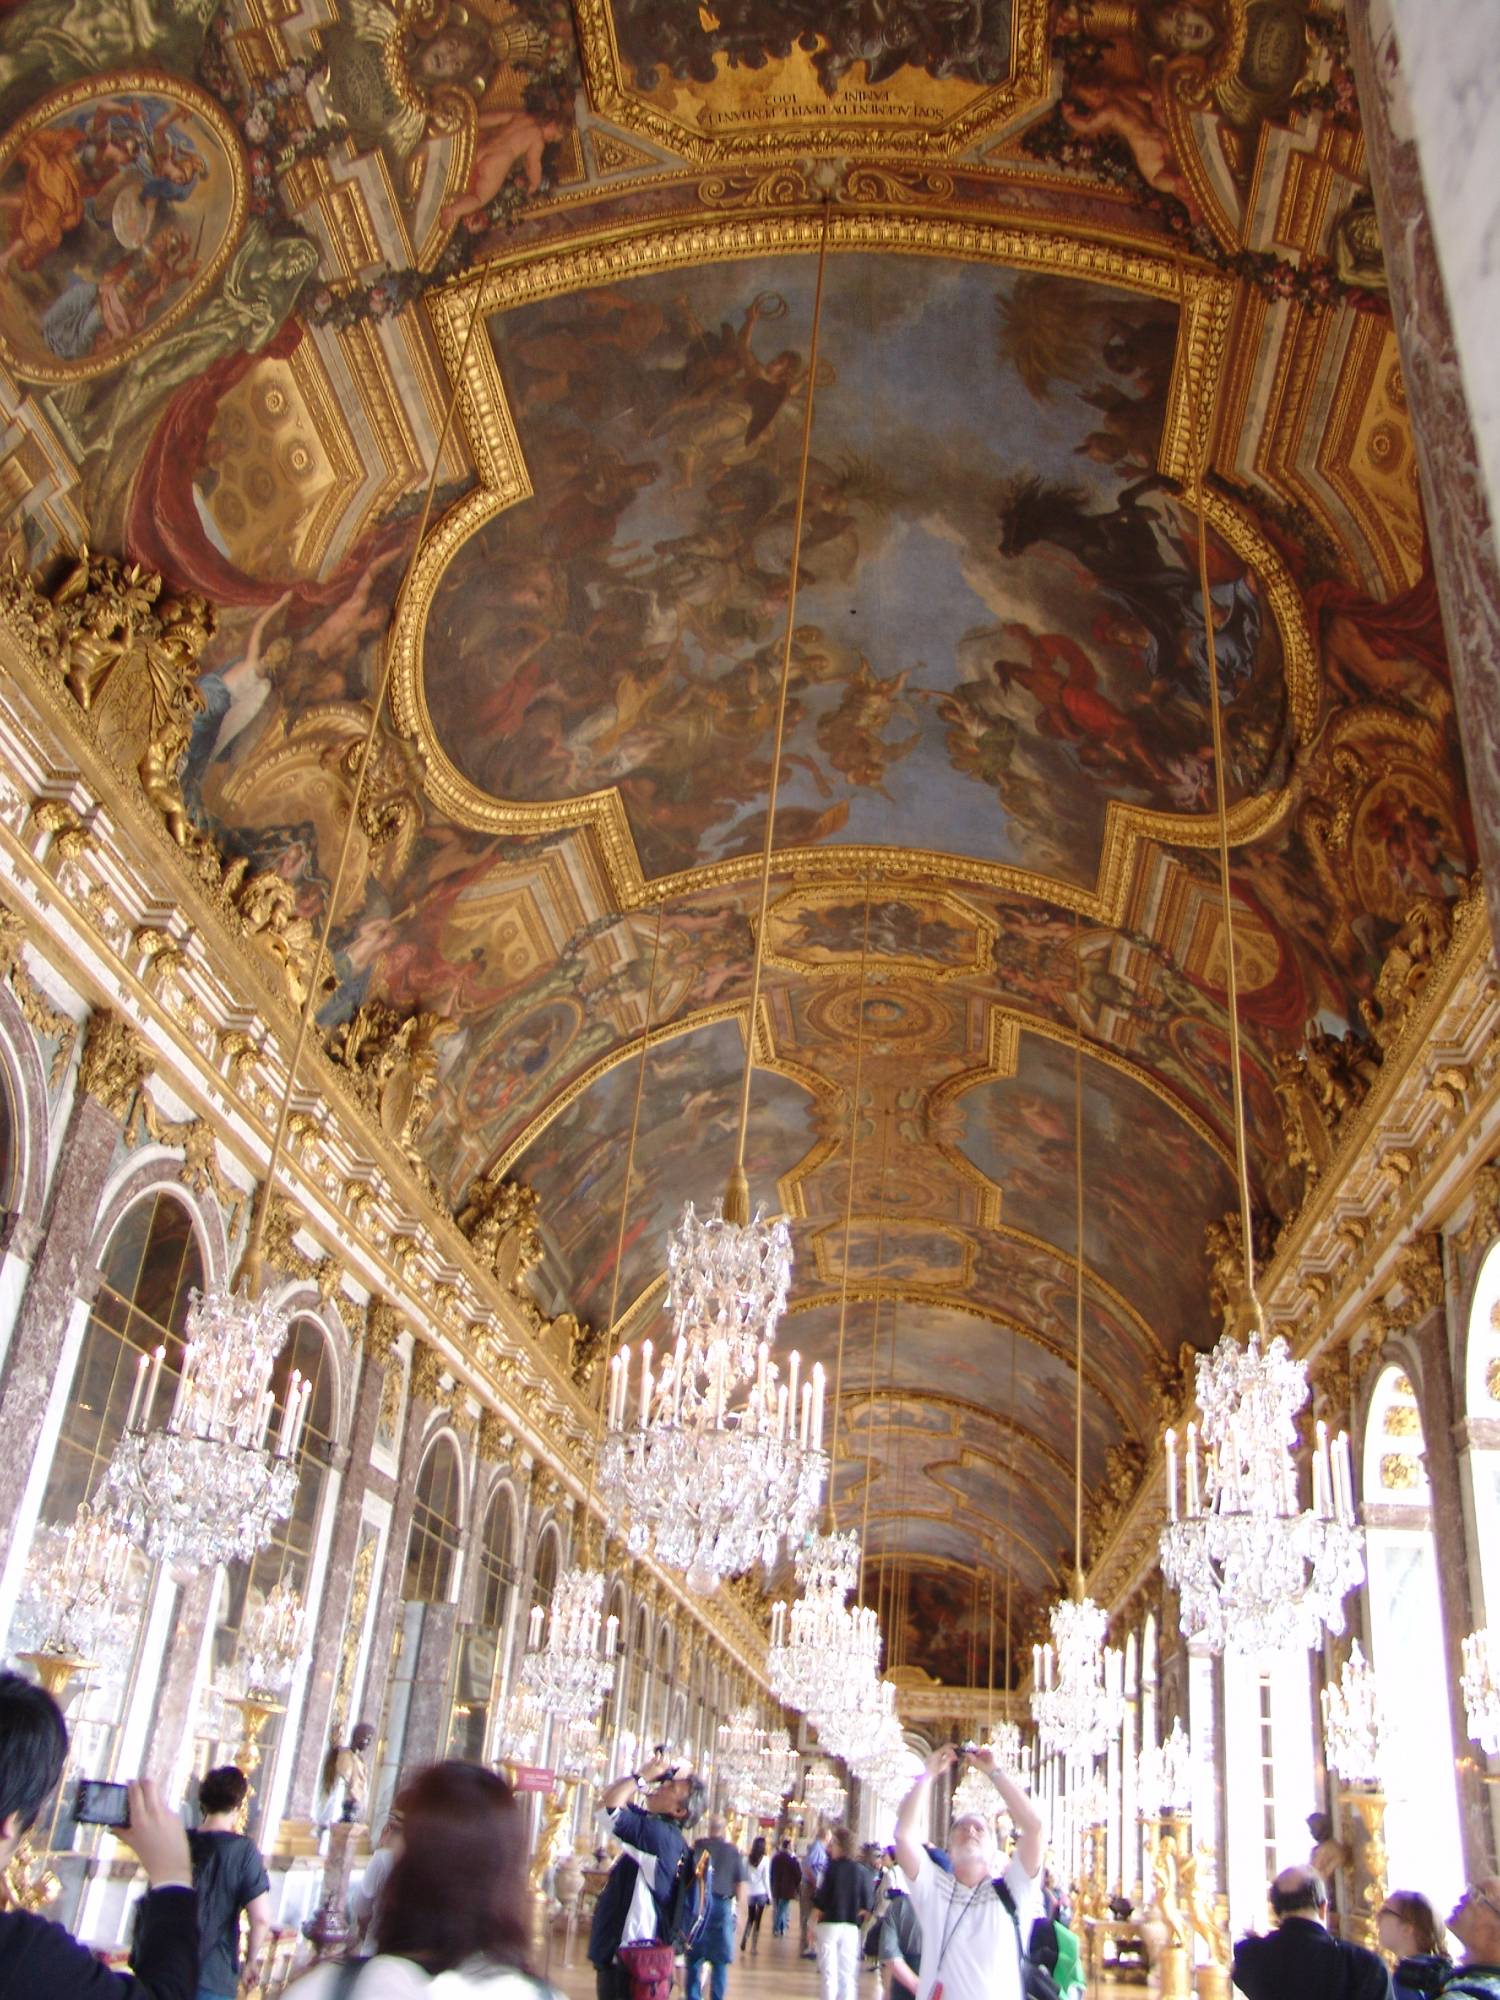 Visit the Palace of Versailles in France |PassPorter.com